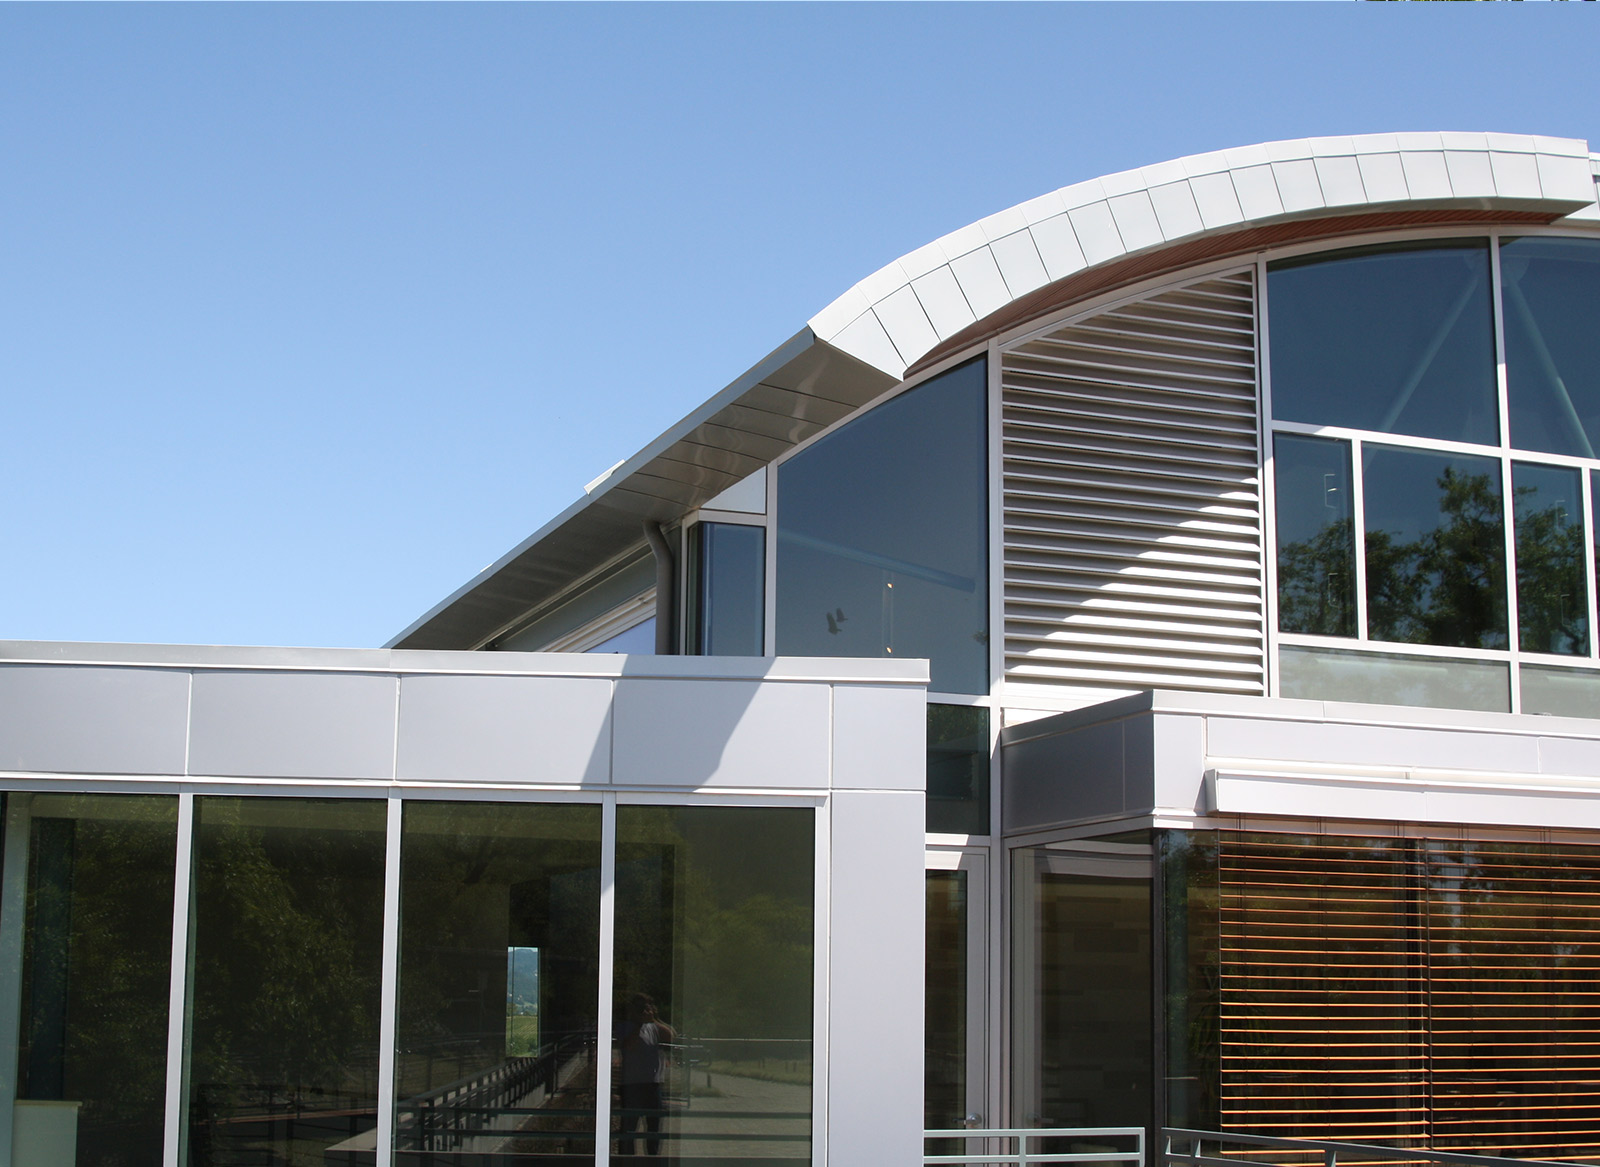 curved metal roof and metal siding